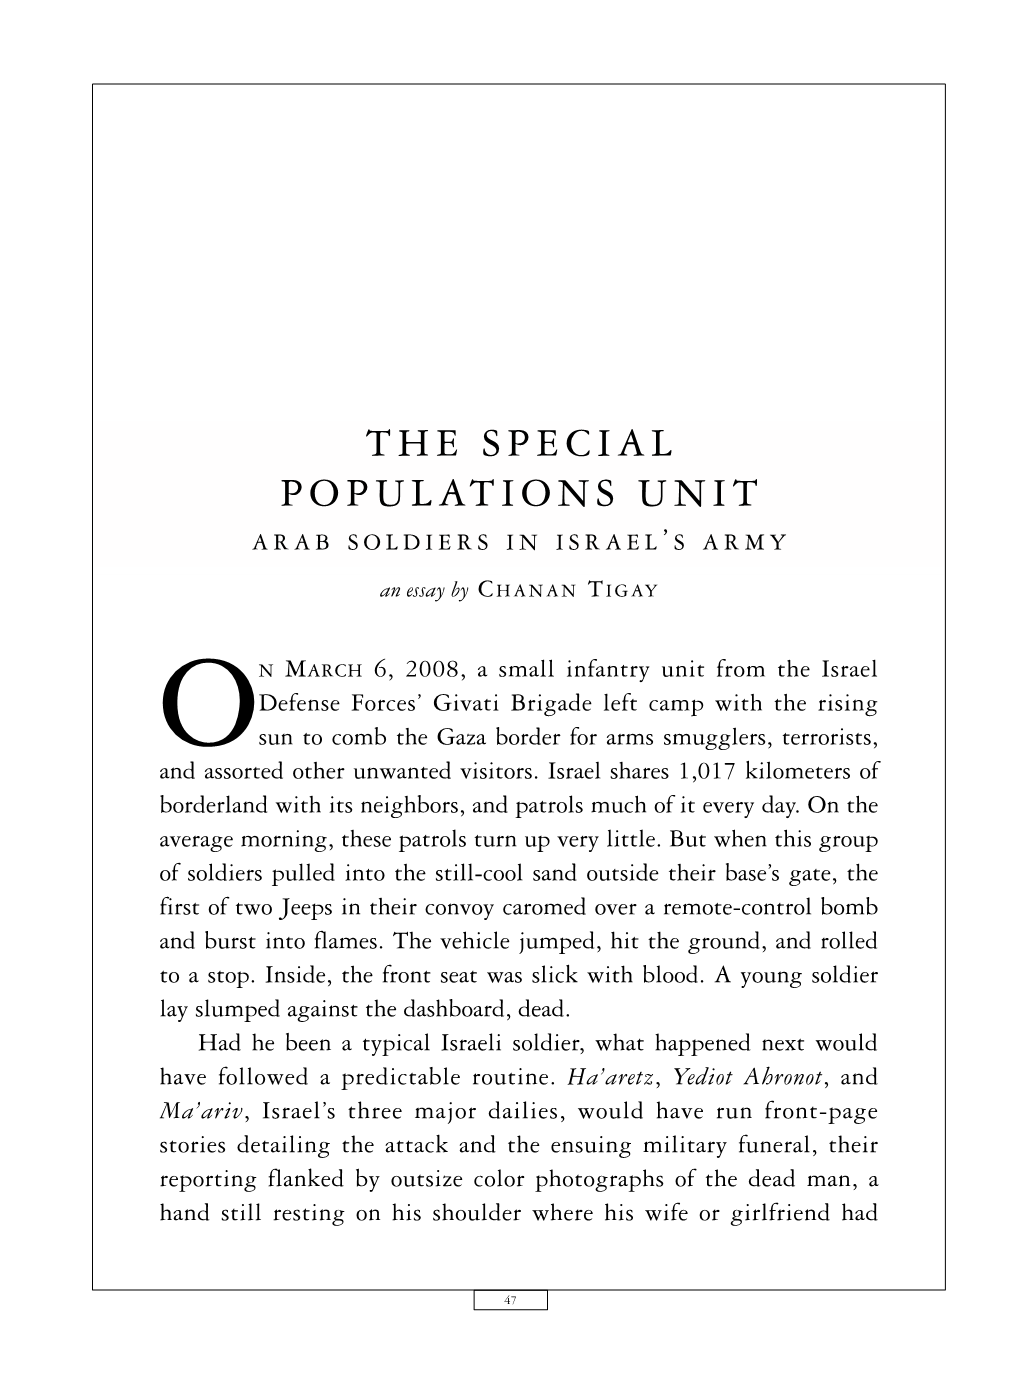 The Special Populations Unit